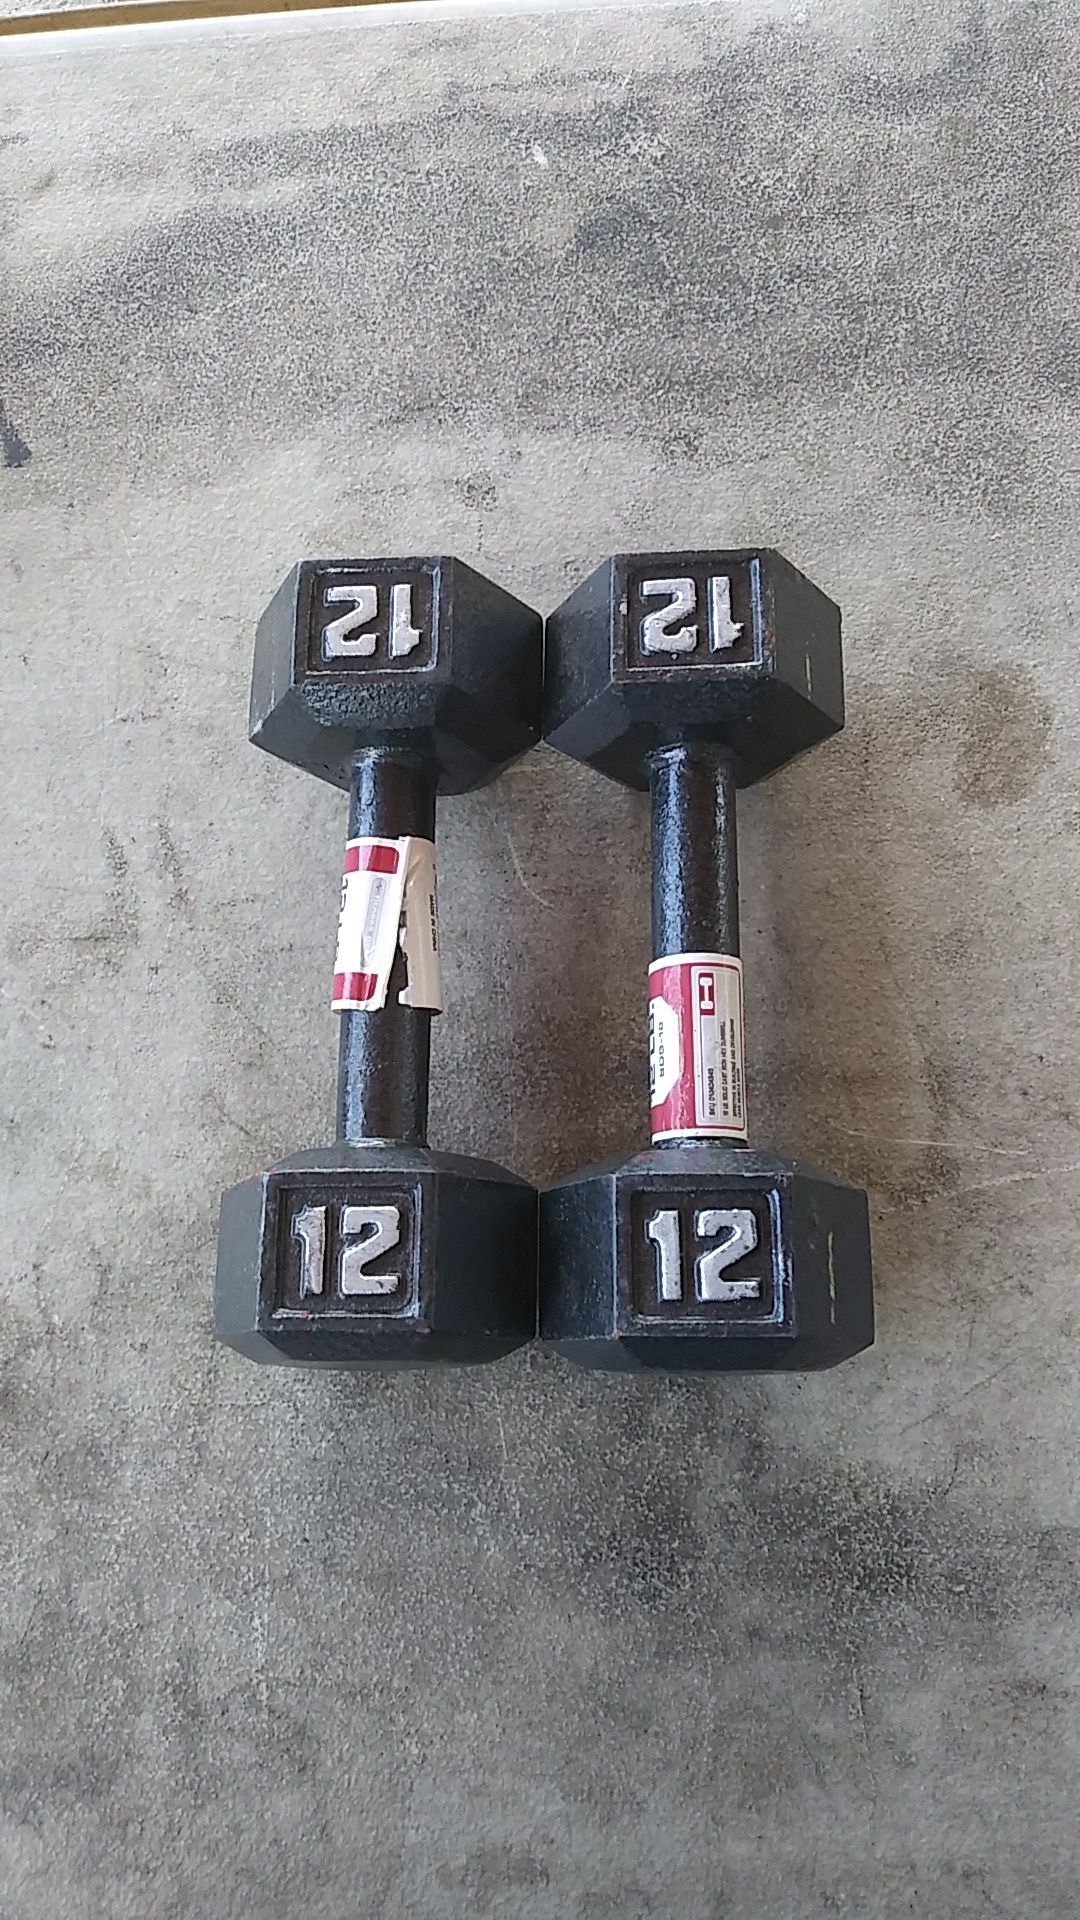 Two 12 pounds dumbbells